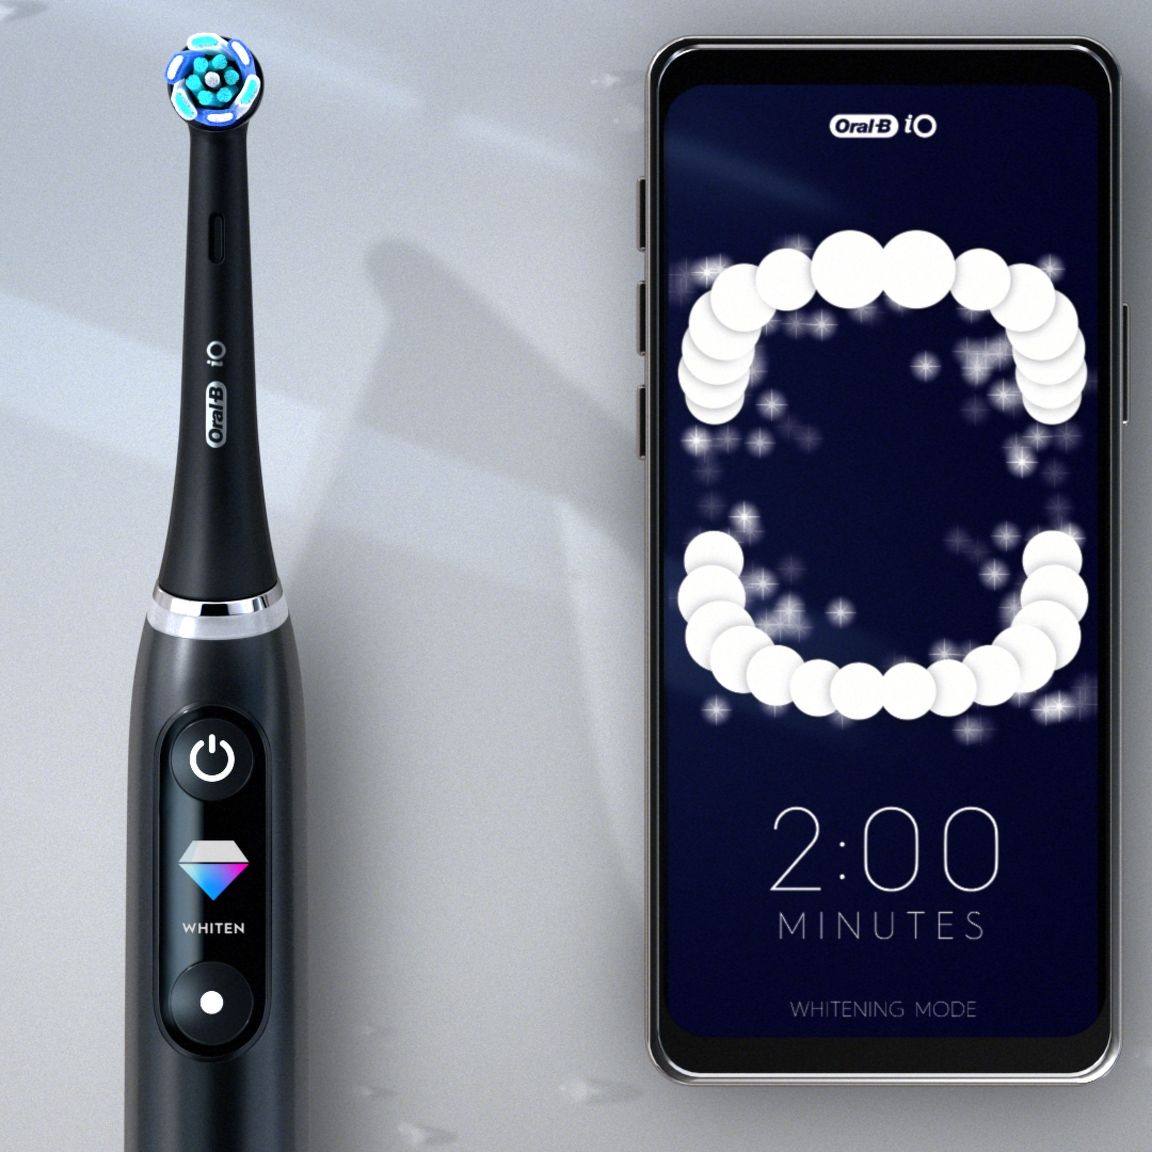 Oral-B cleaning modes explained - Electric Teeth